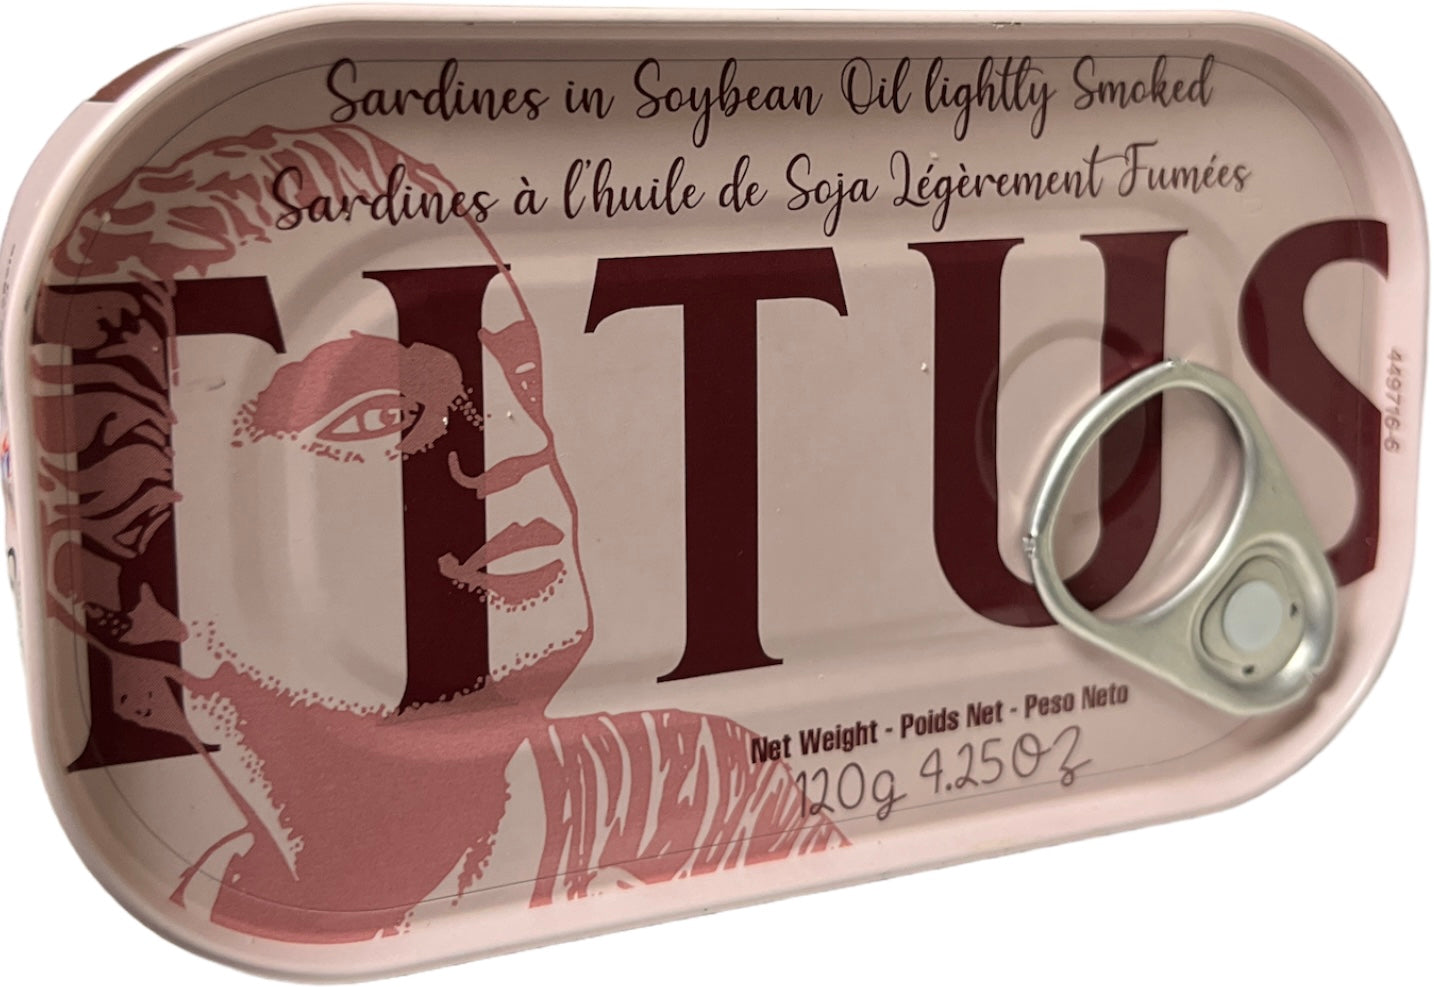 Titus Sardines Smoked in Soya Oil 125g